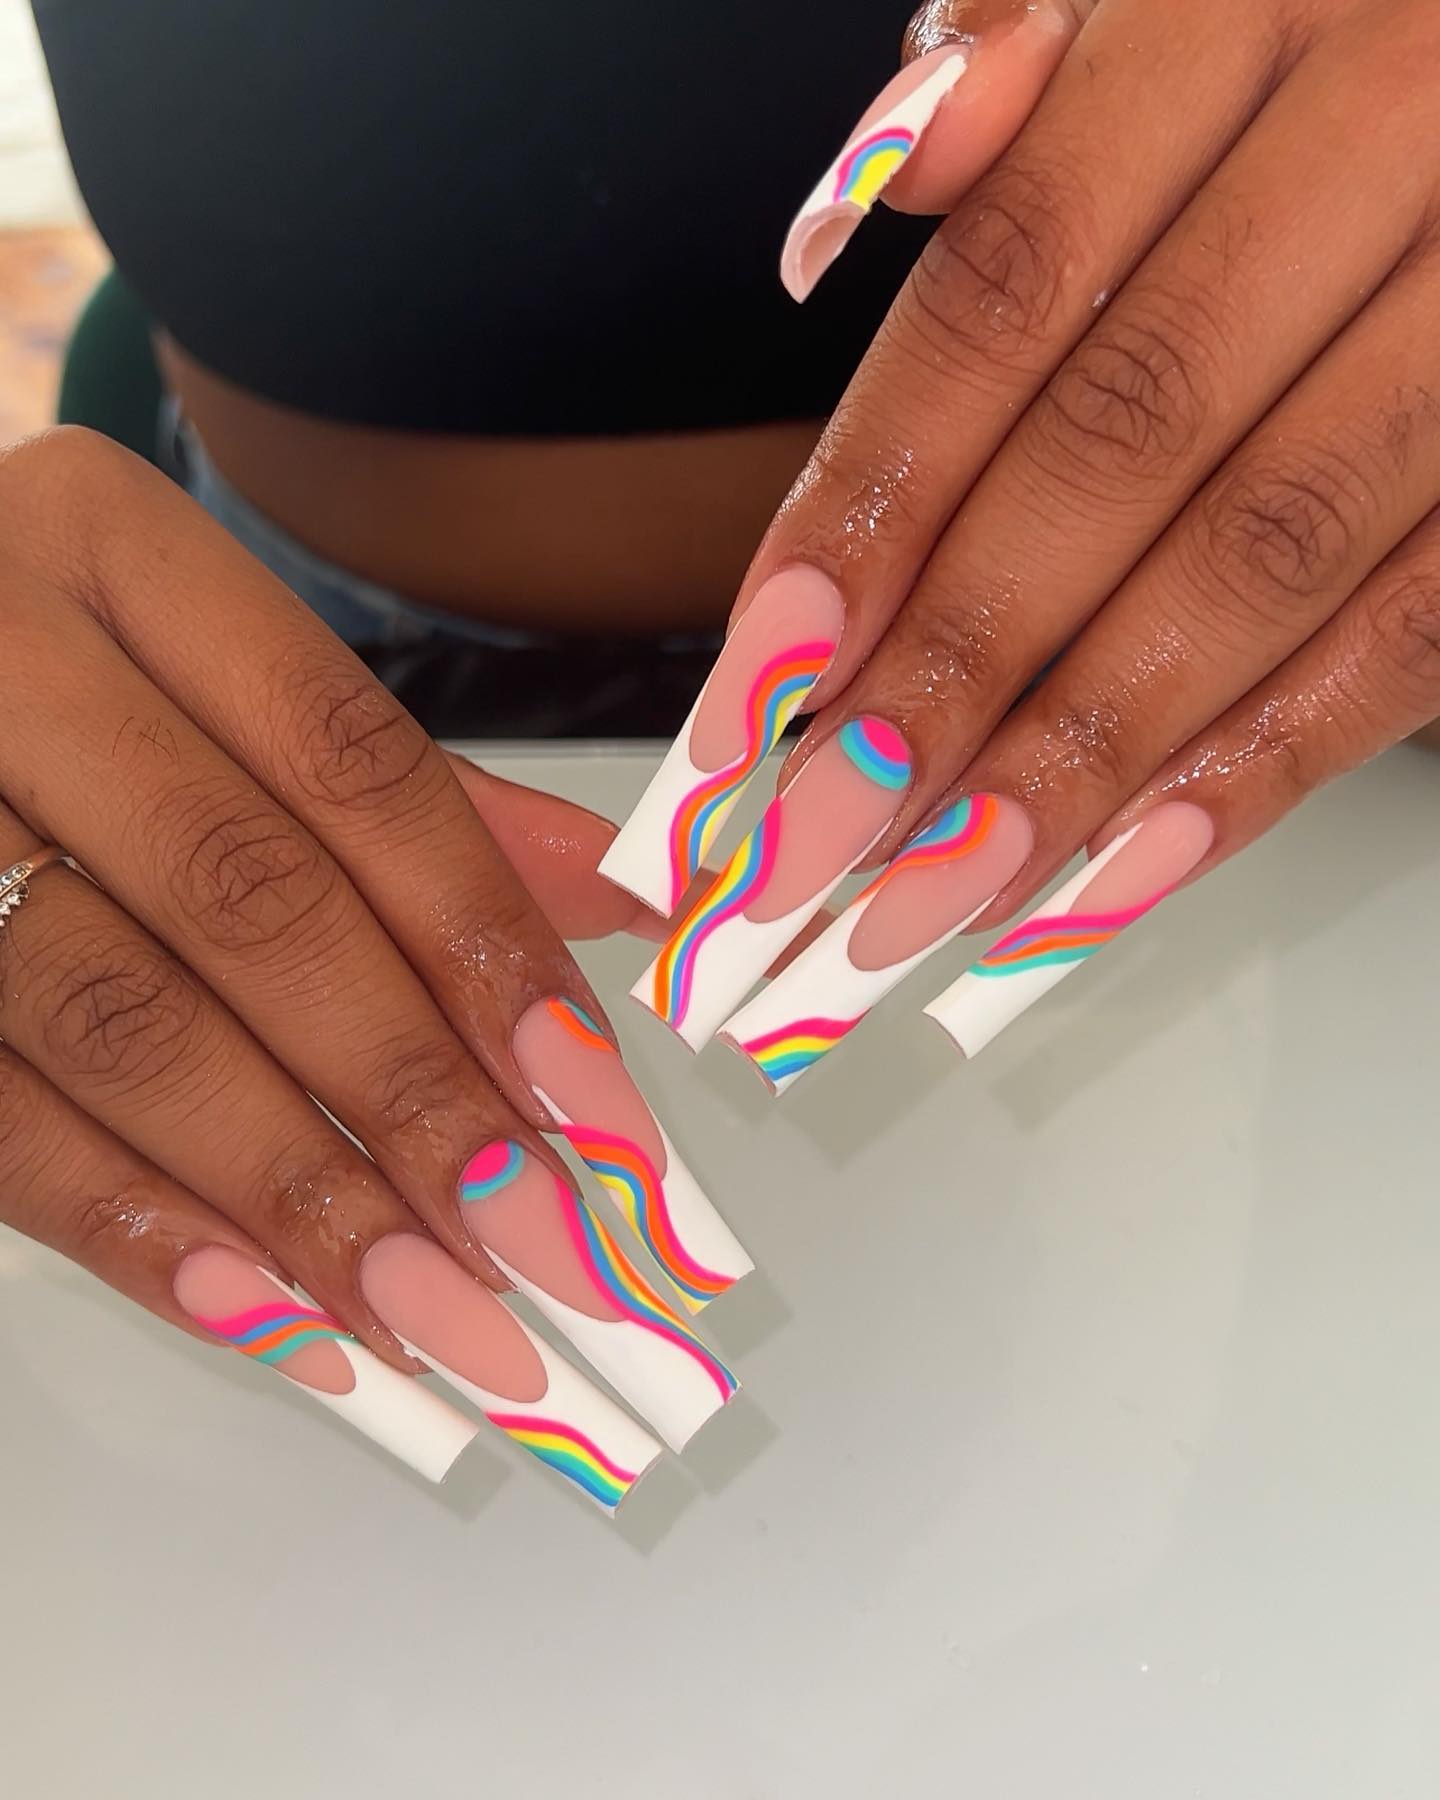 White French Tips With Abstract Design